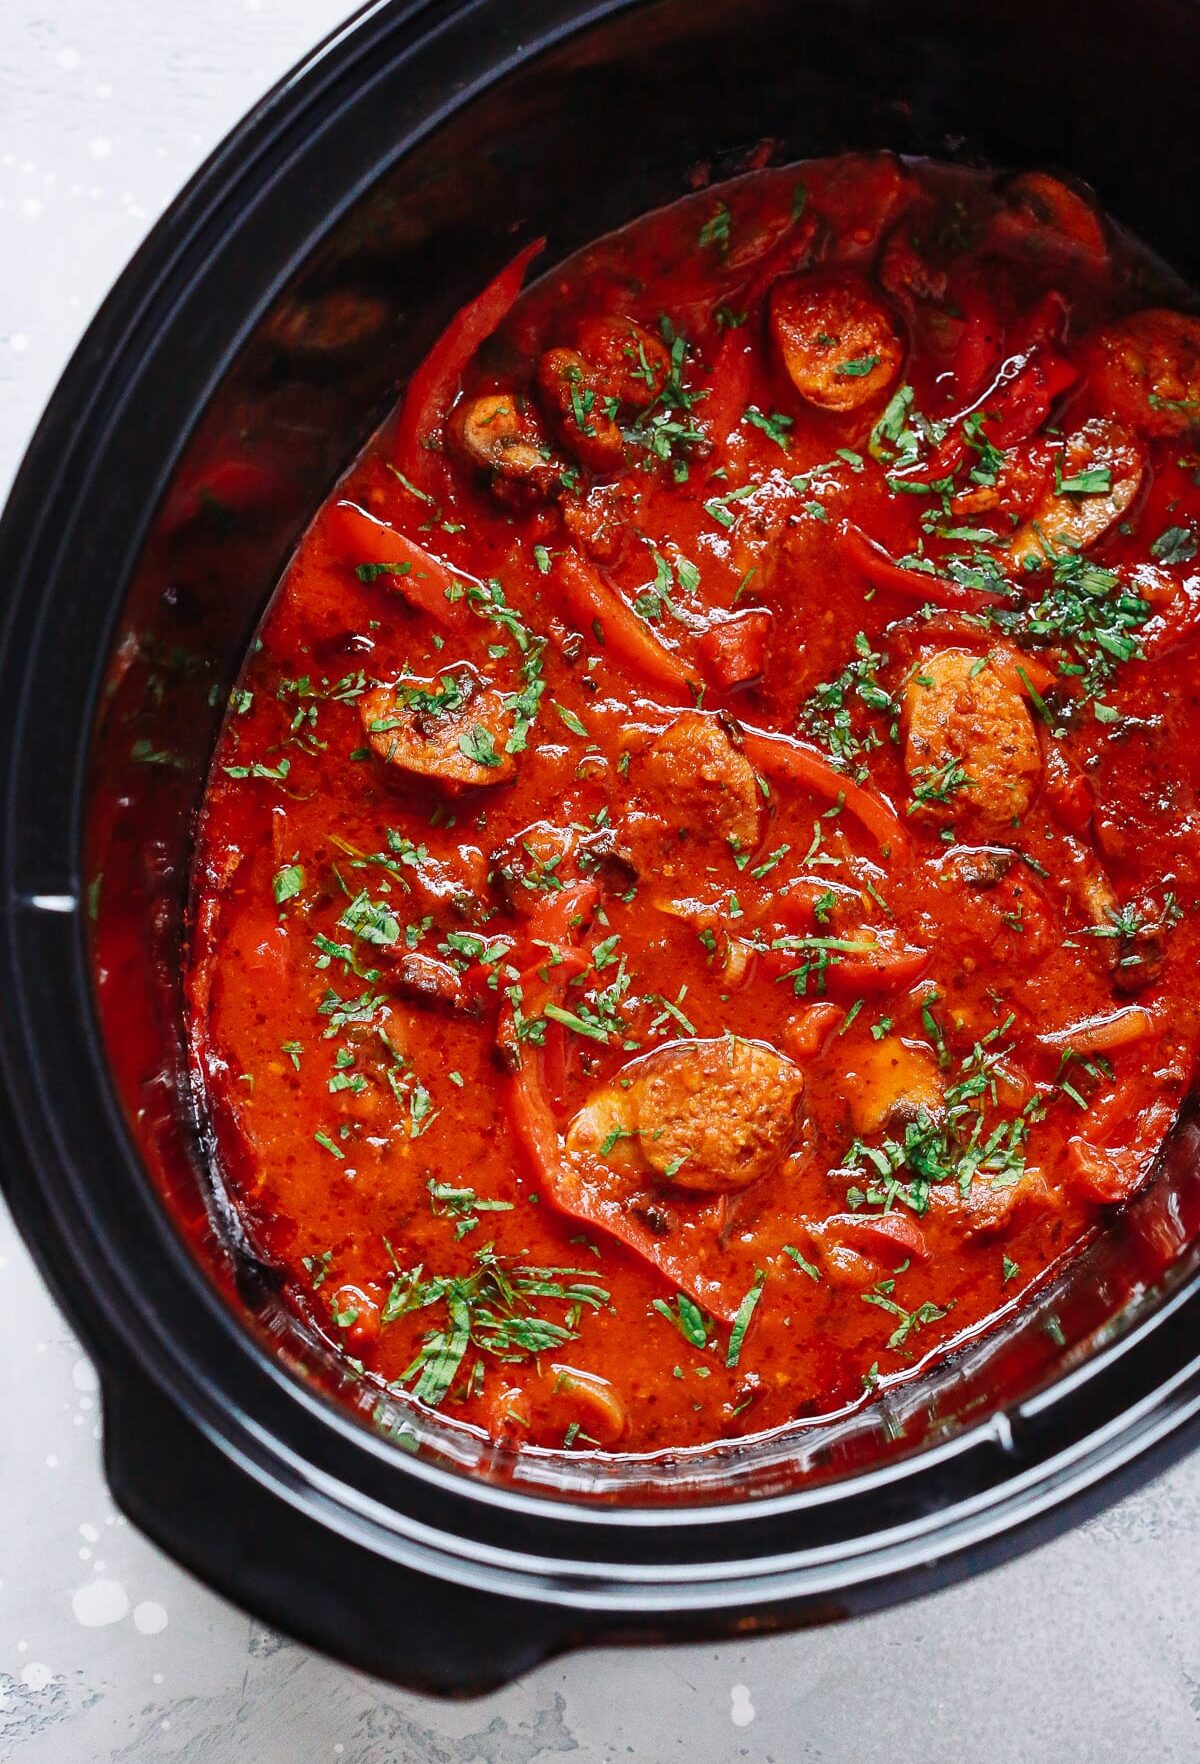 Italian sausage with peppers and tomato sauce in a slow cooker